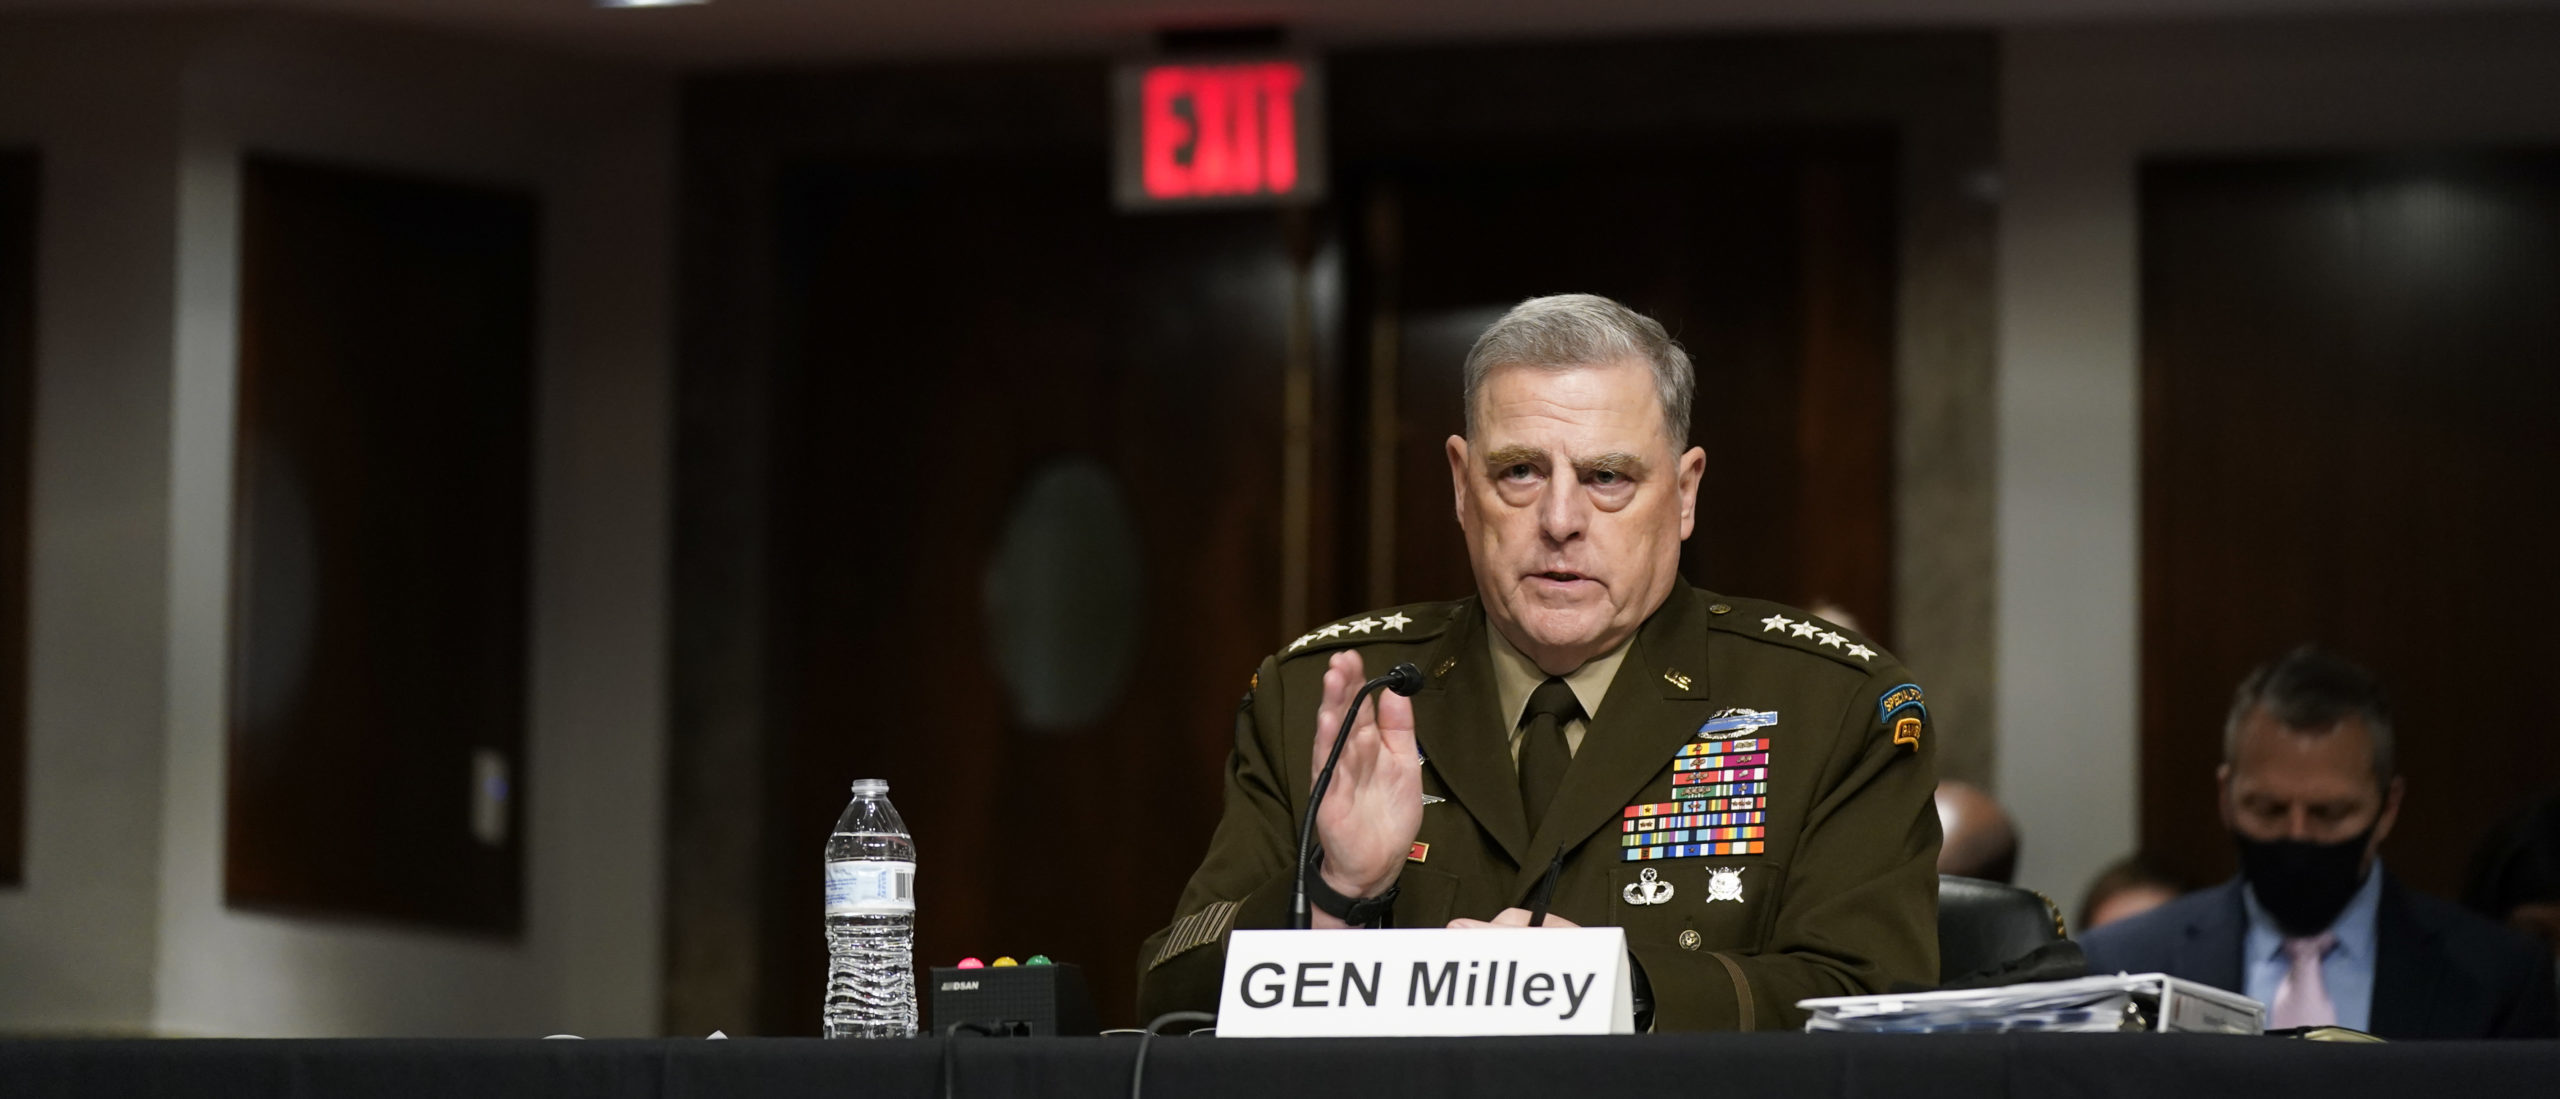 Chairman of the Joint Chiefs of Staff Gen. Mark A. Milley speaks during a Senate Armed Services Committee hearing on the conclusion of military operations in Afghanistan and plans for future counterterrorism operations on Capitol Hill on September 28, 2021 in Washington, DC. (Photo by Patrick Semansky-Pool/Getty Images)